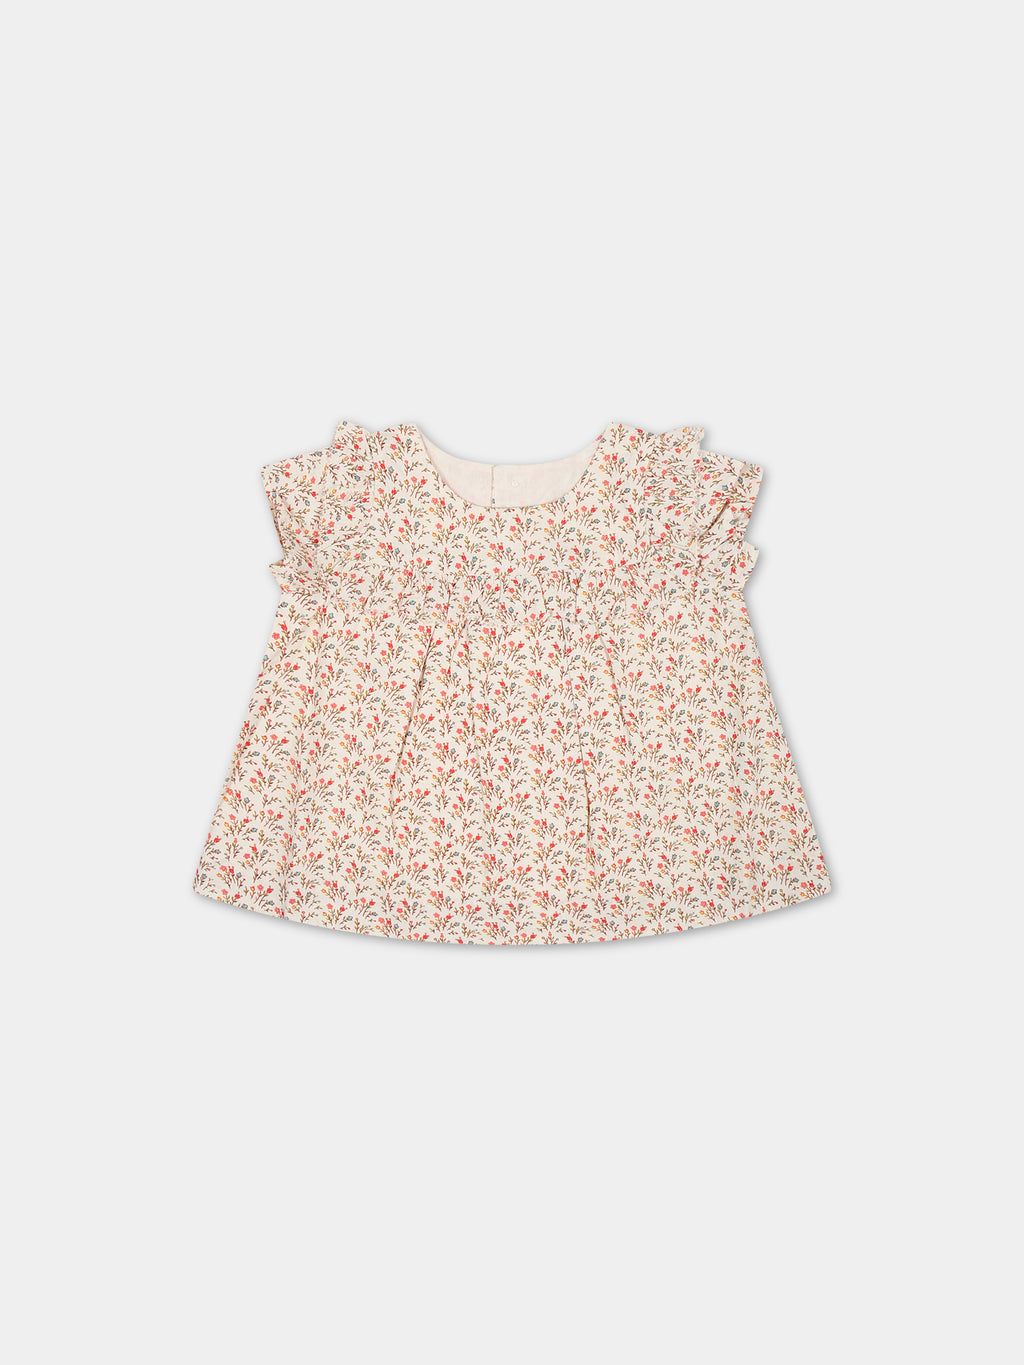 Beige top for baby girl with all-over floral pattern